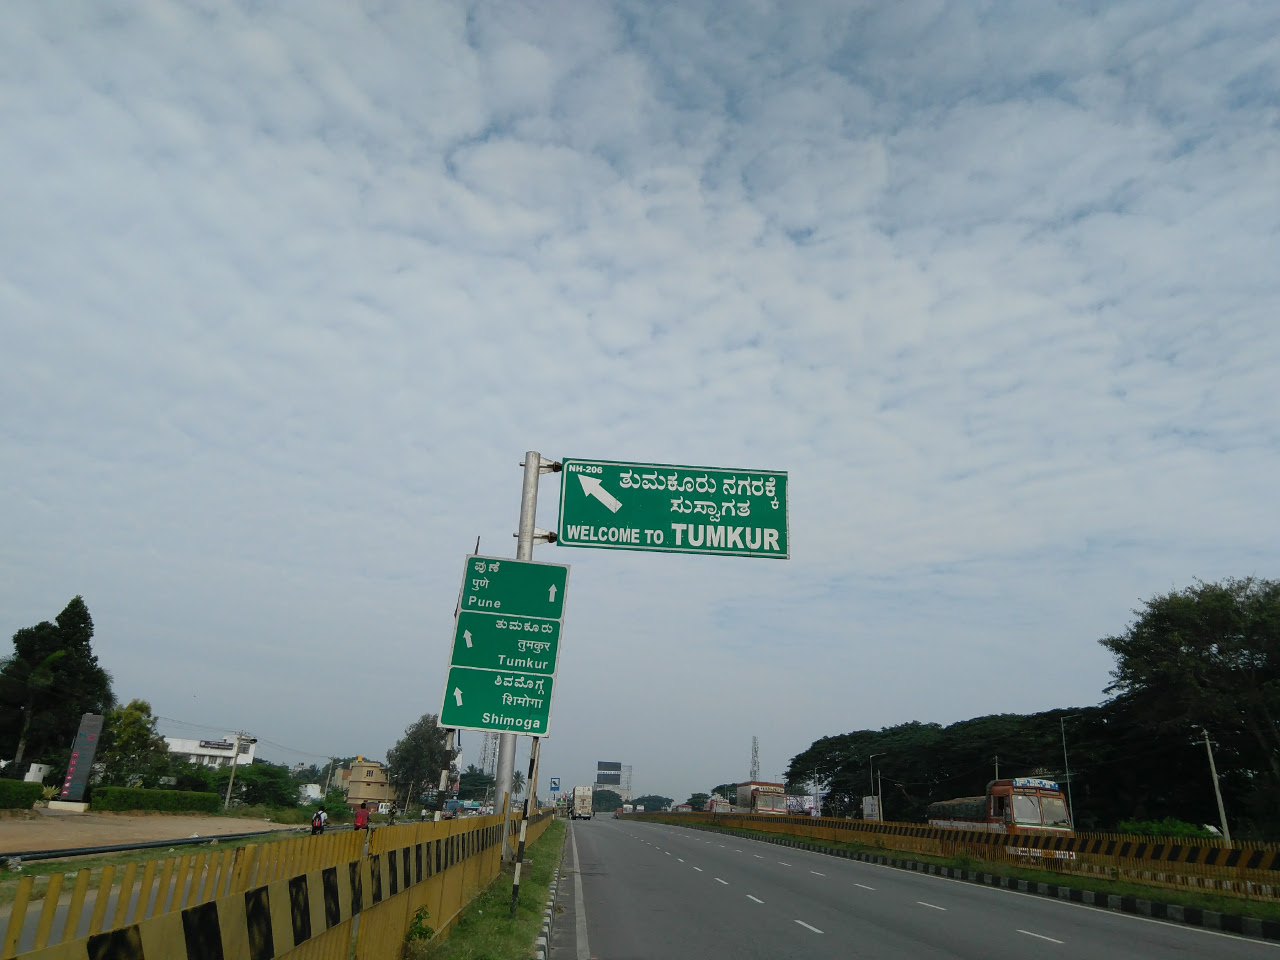 Welcome to Tumkur